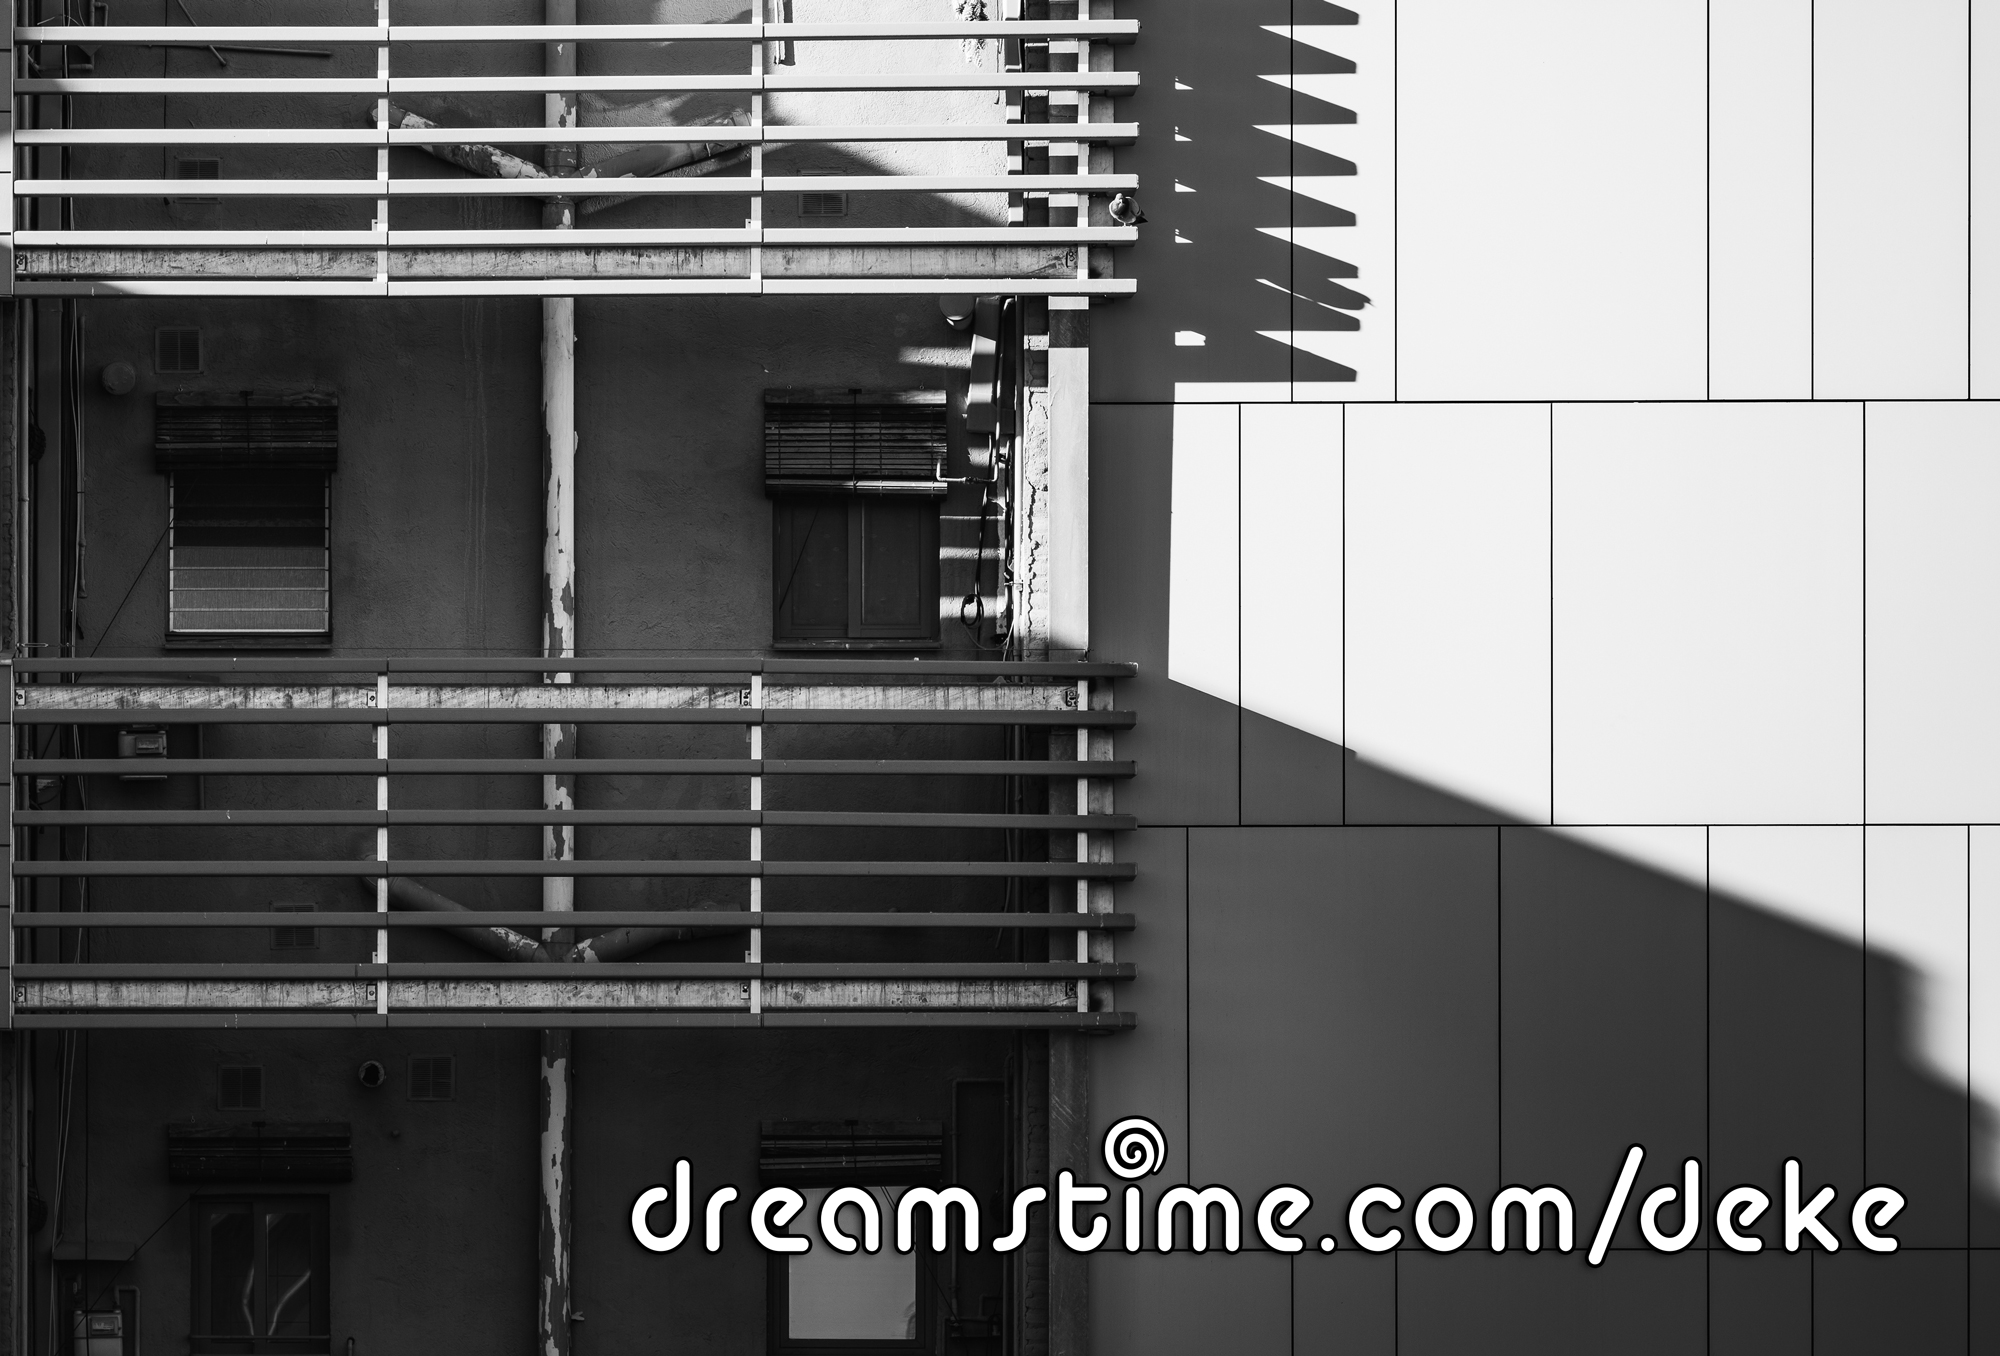 A black and white urban photo from Dreamstime.com